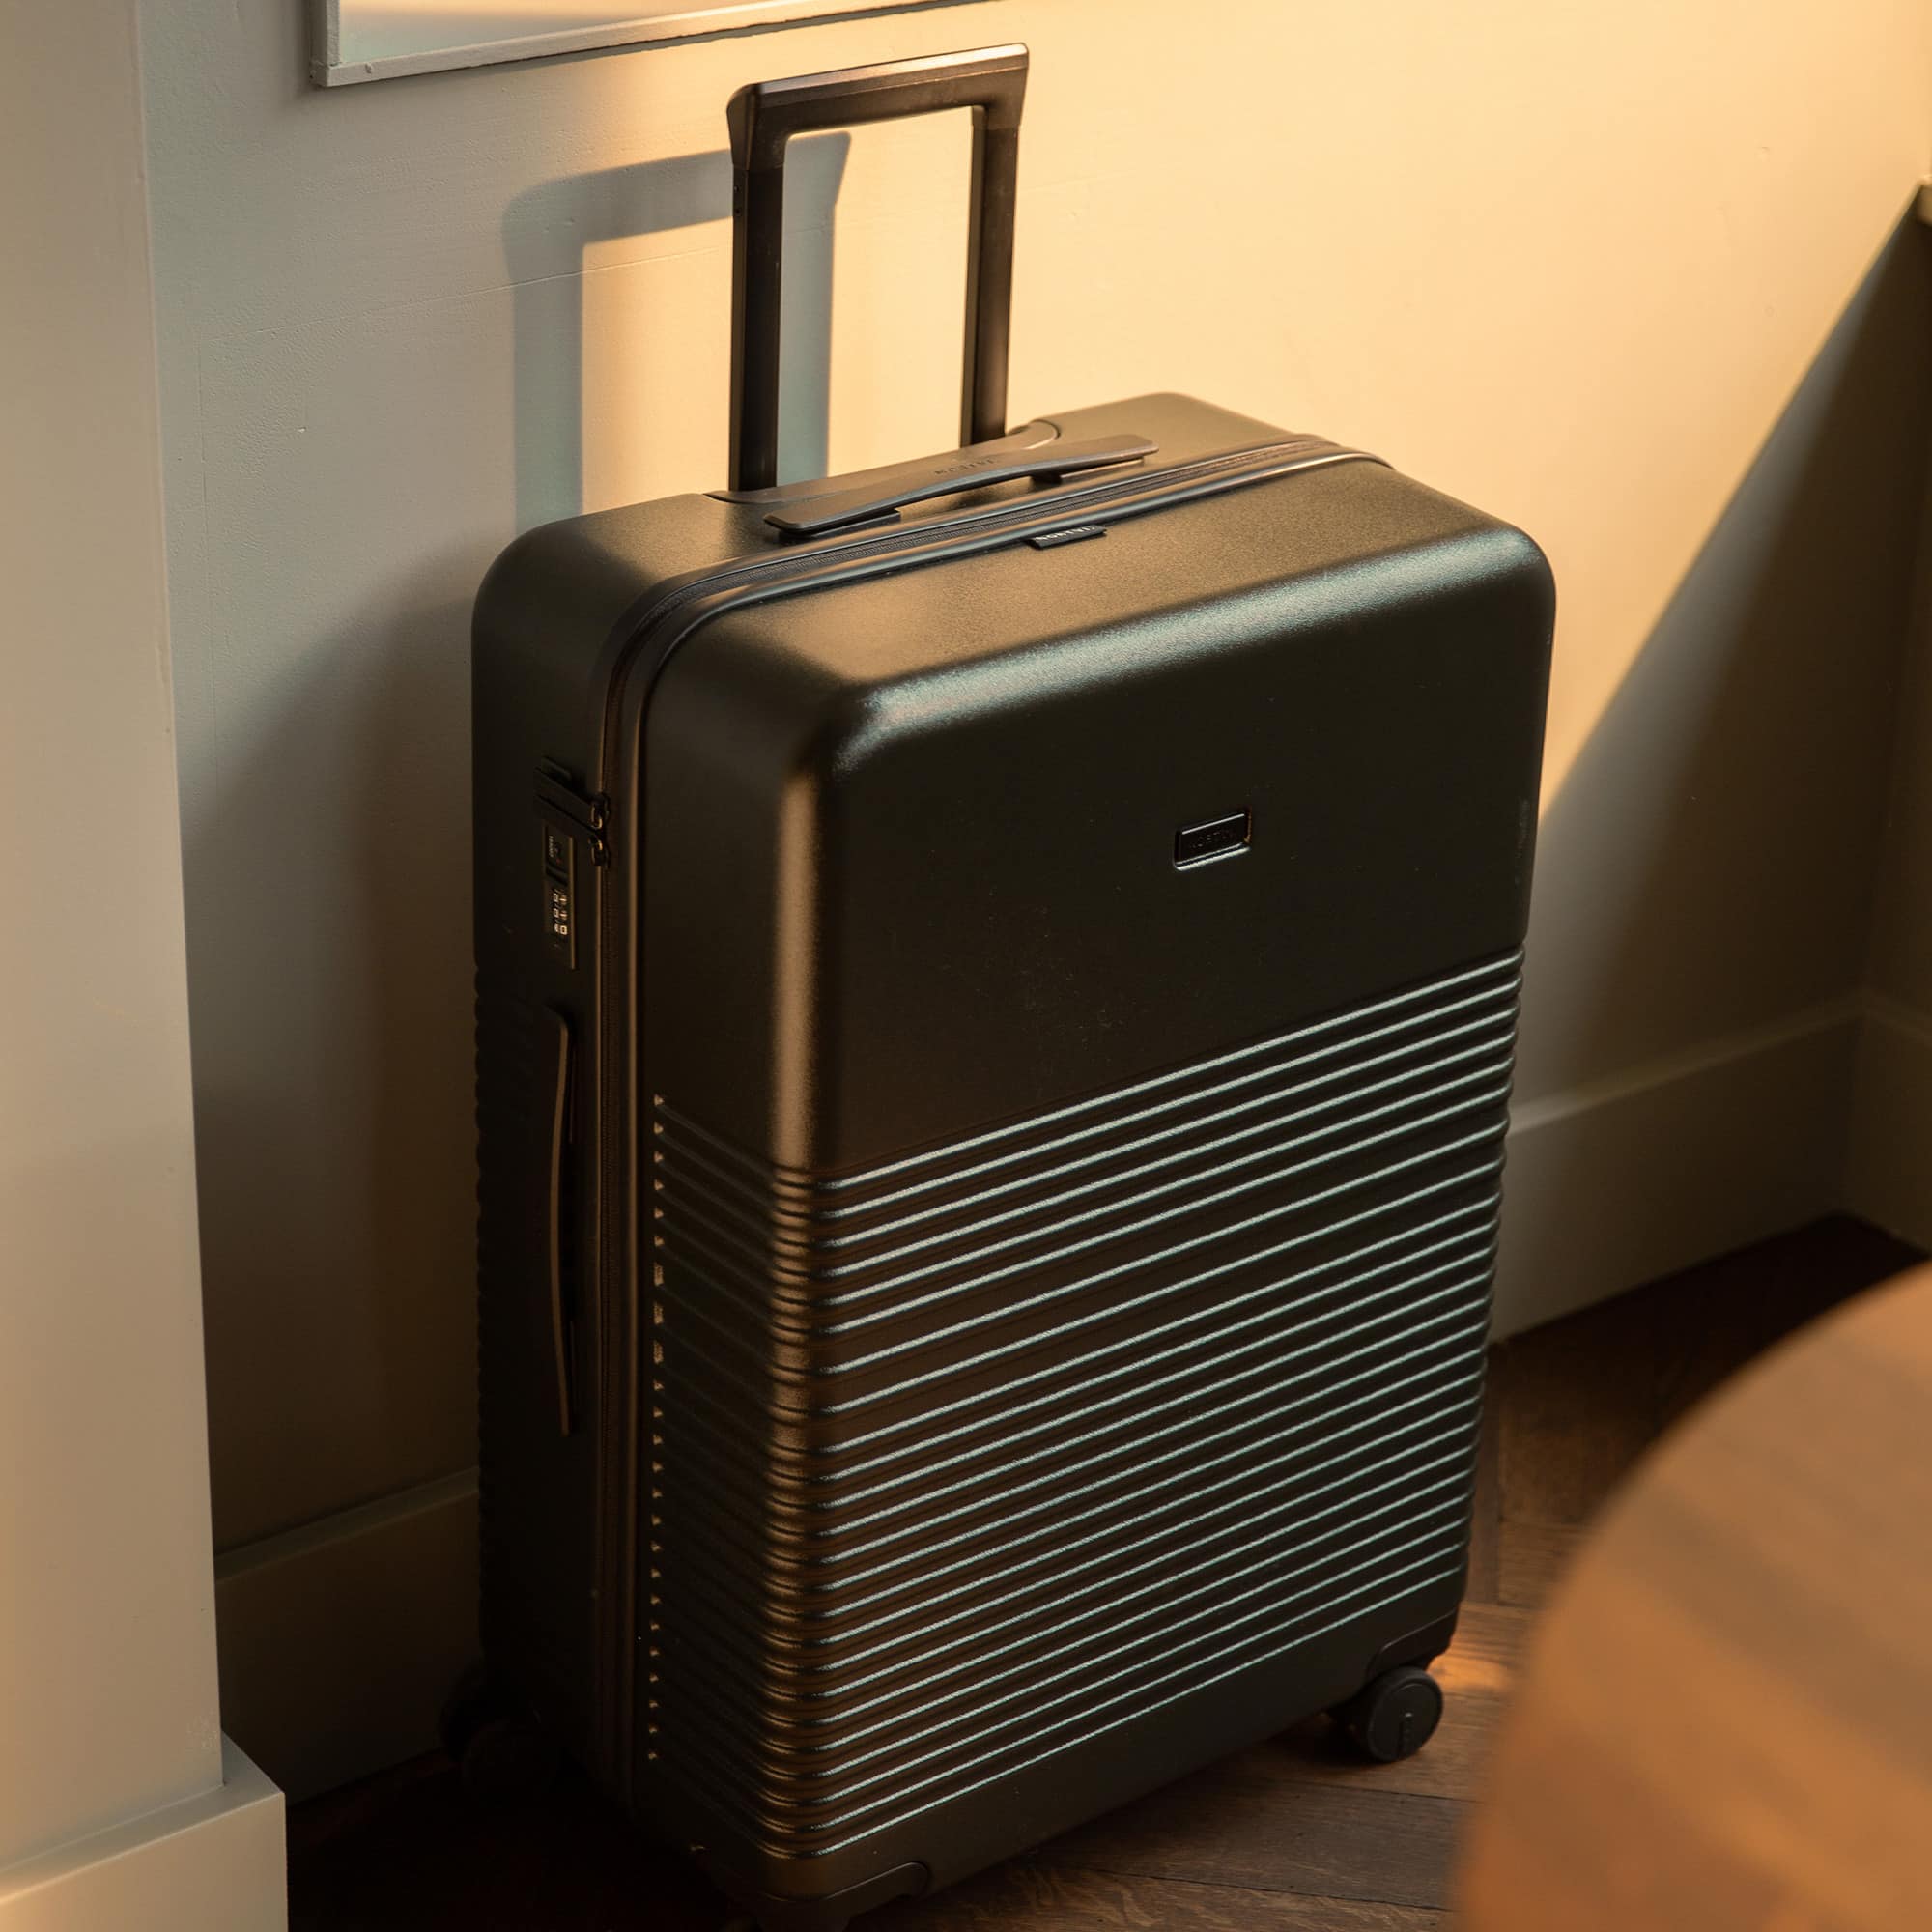 Nortvi check-in suitcase